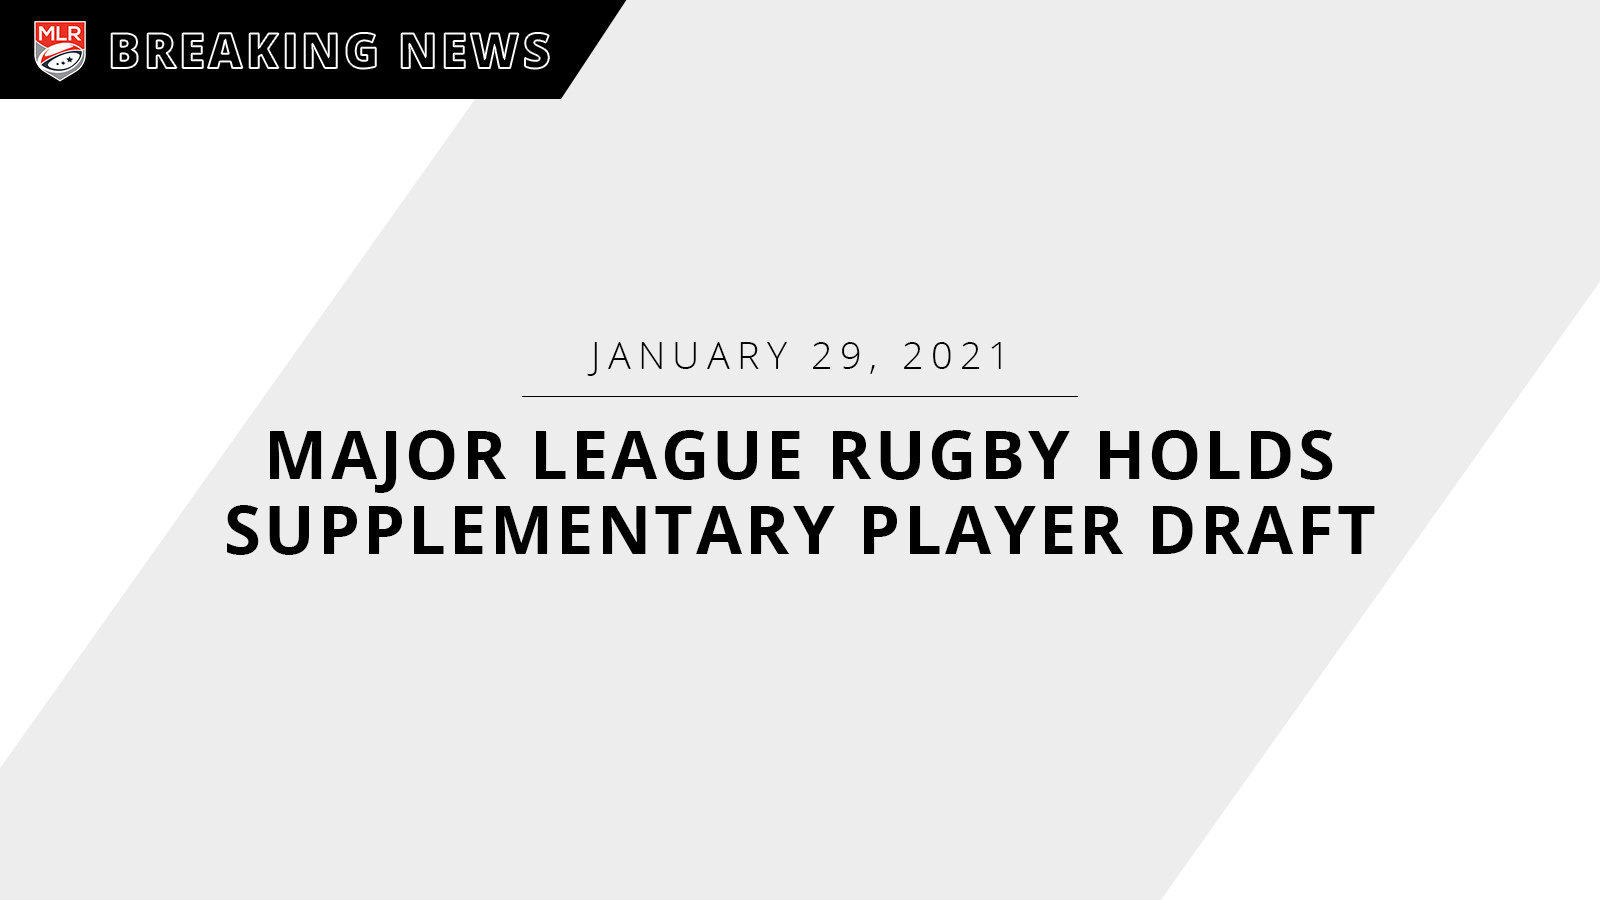 MAJOR LEAGUE RUGBY HOLDS SUPPLEMENTARY PLAYER DRAFT